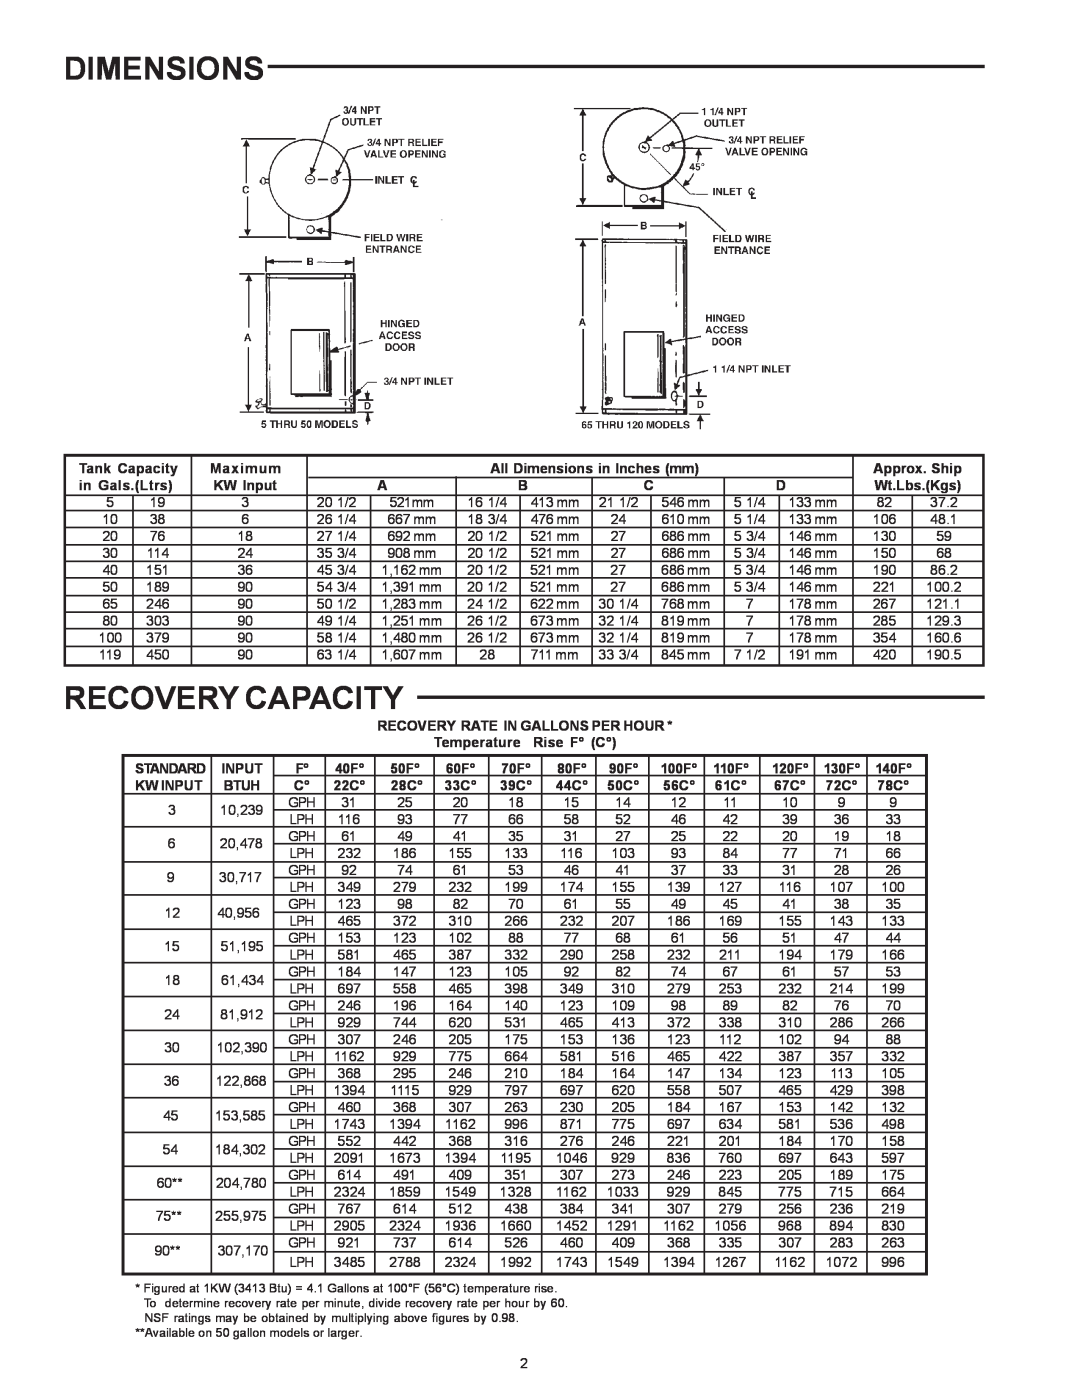 State Industries SSE-5 Recovery Capacity, Tank Capacity, Maximum, All Dimensions in Inches mm, Approx. Ship, KW Input 